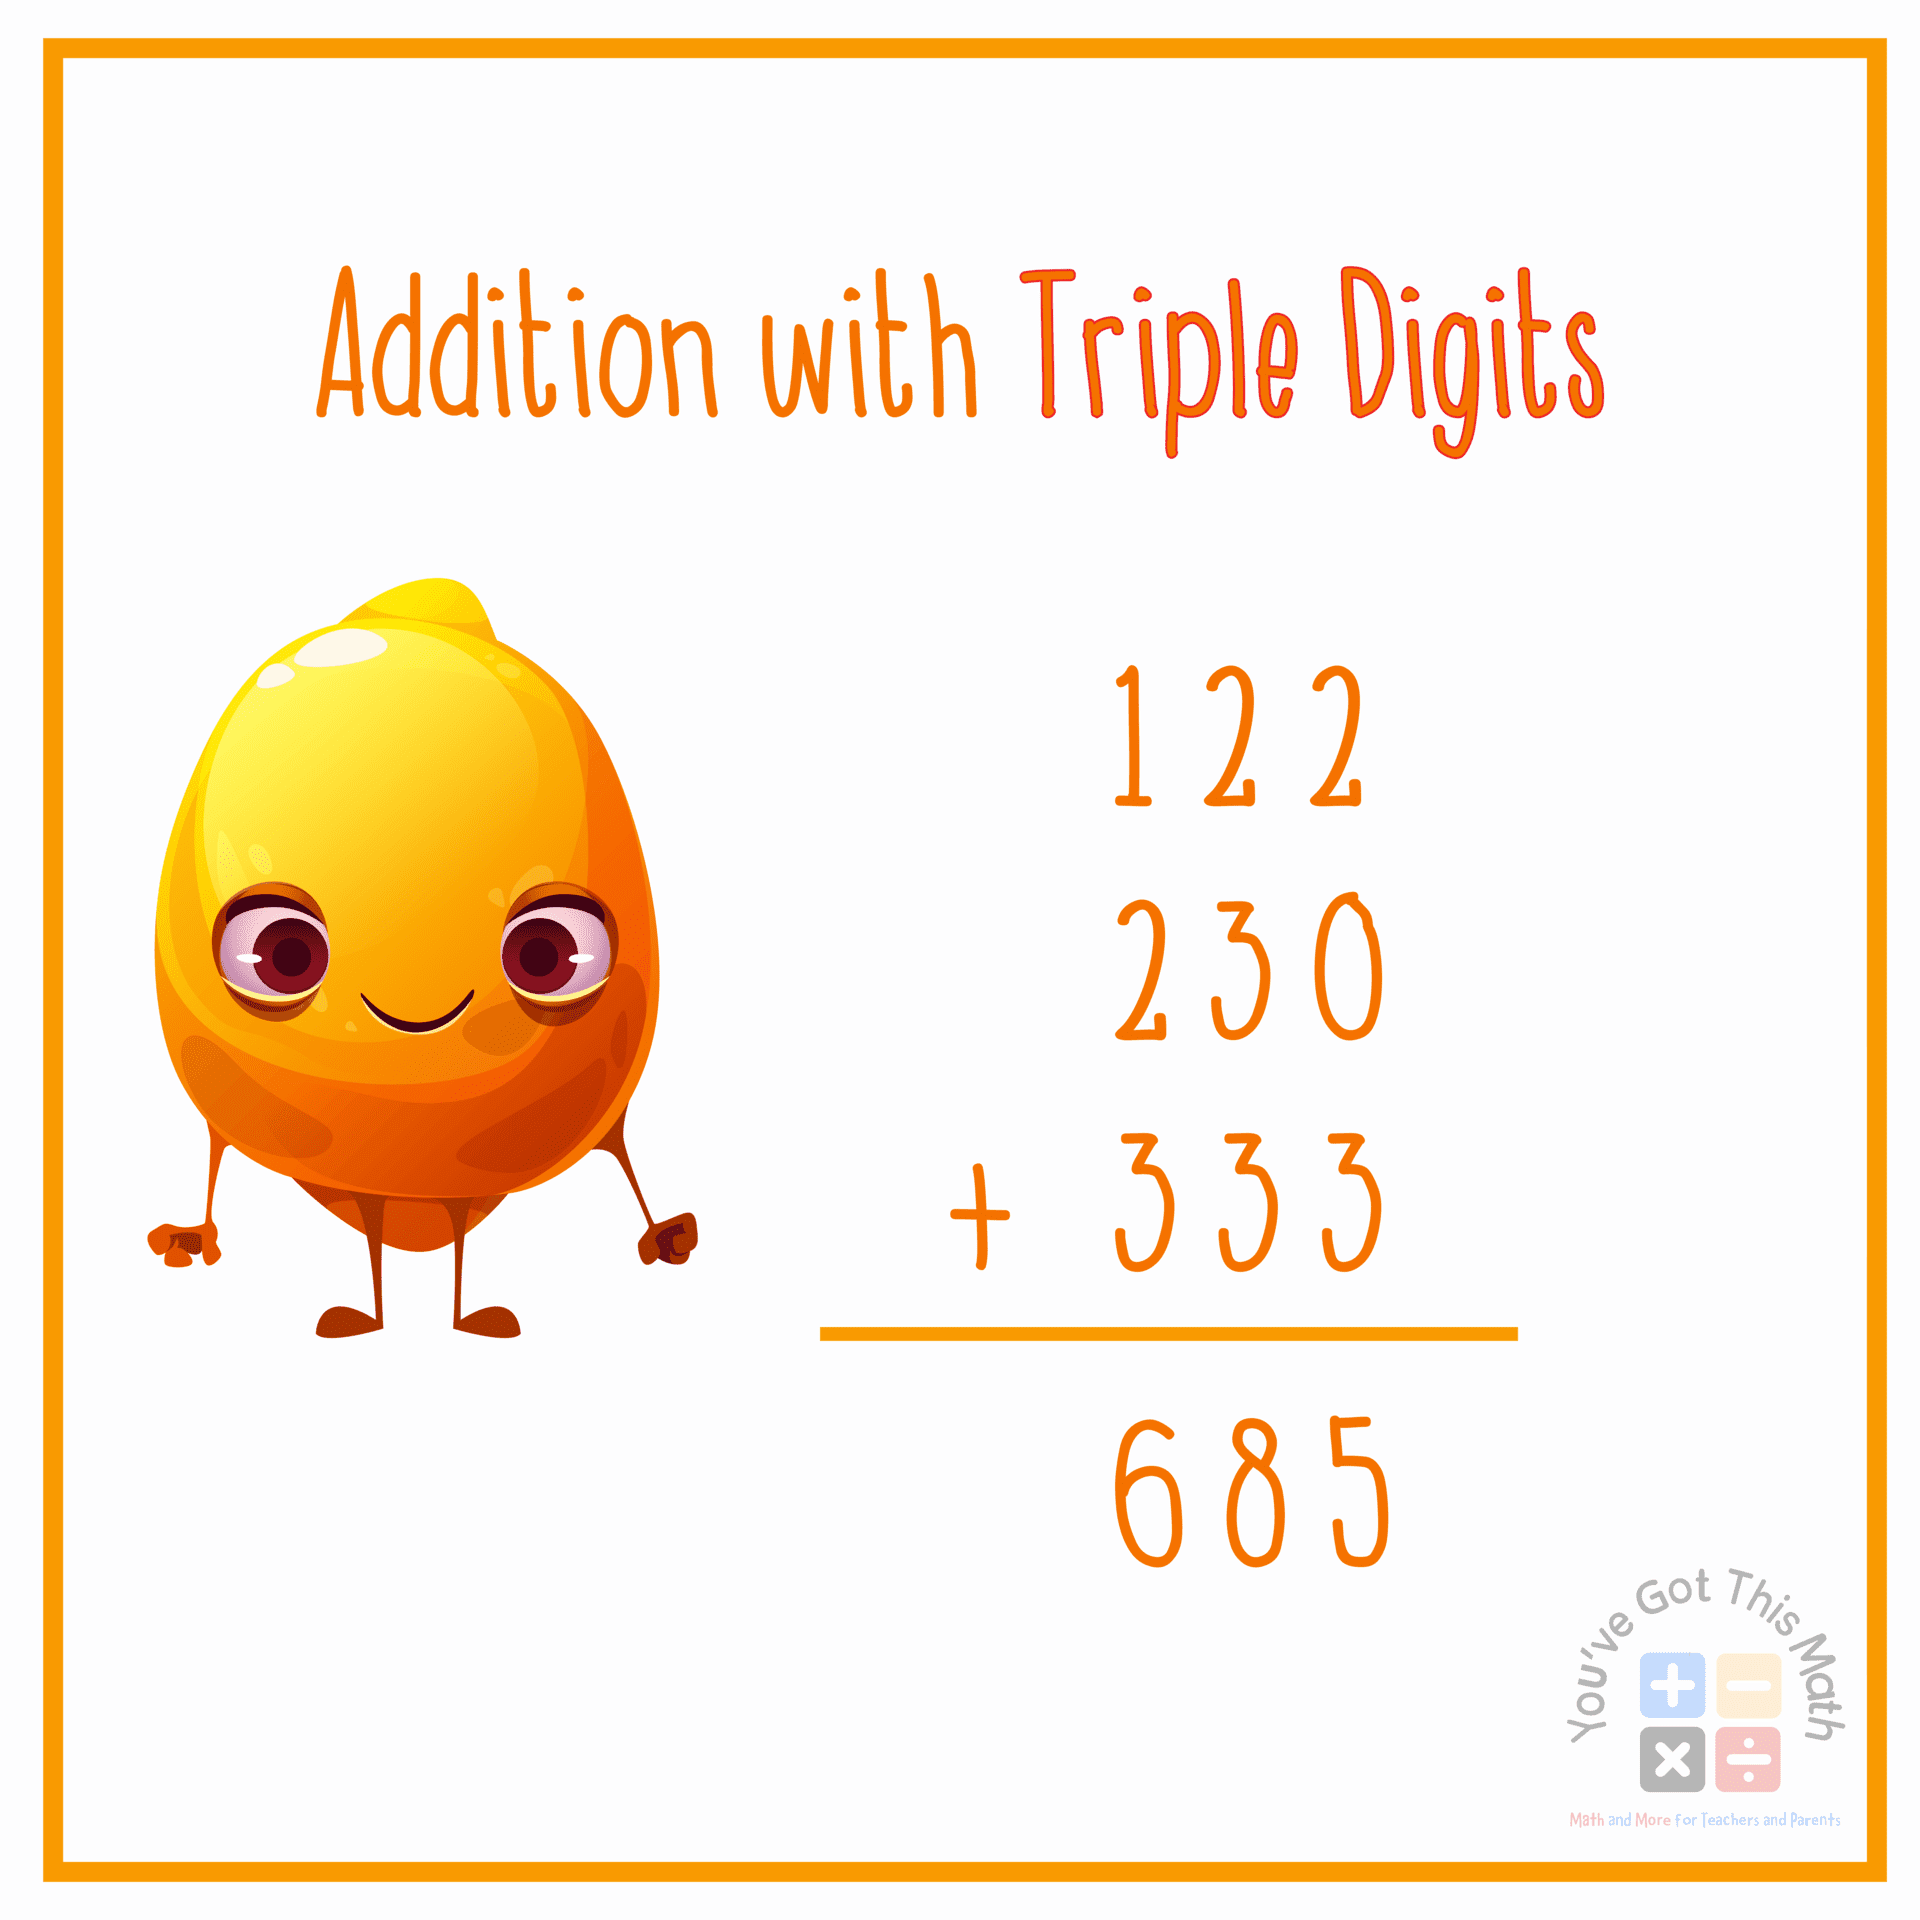 Addition with Triple digits for adding with 3 addends